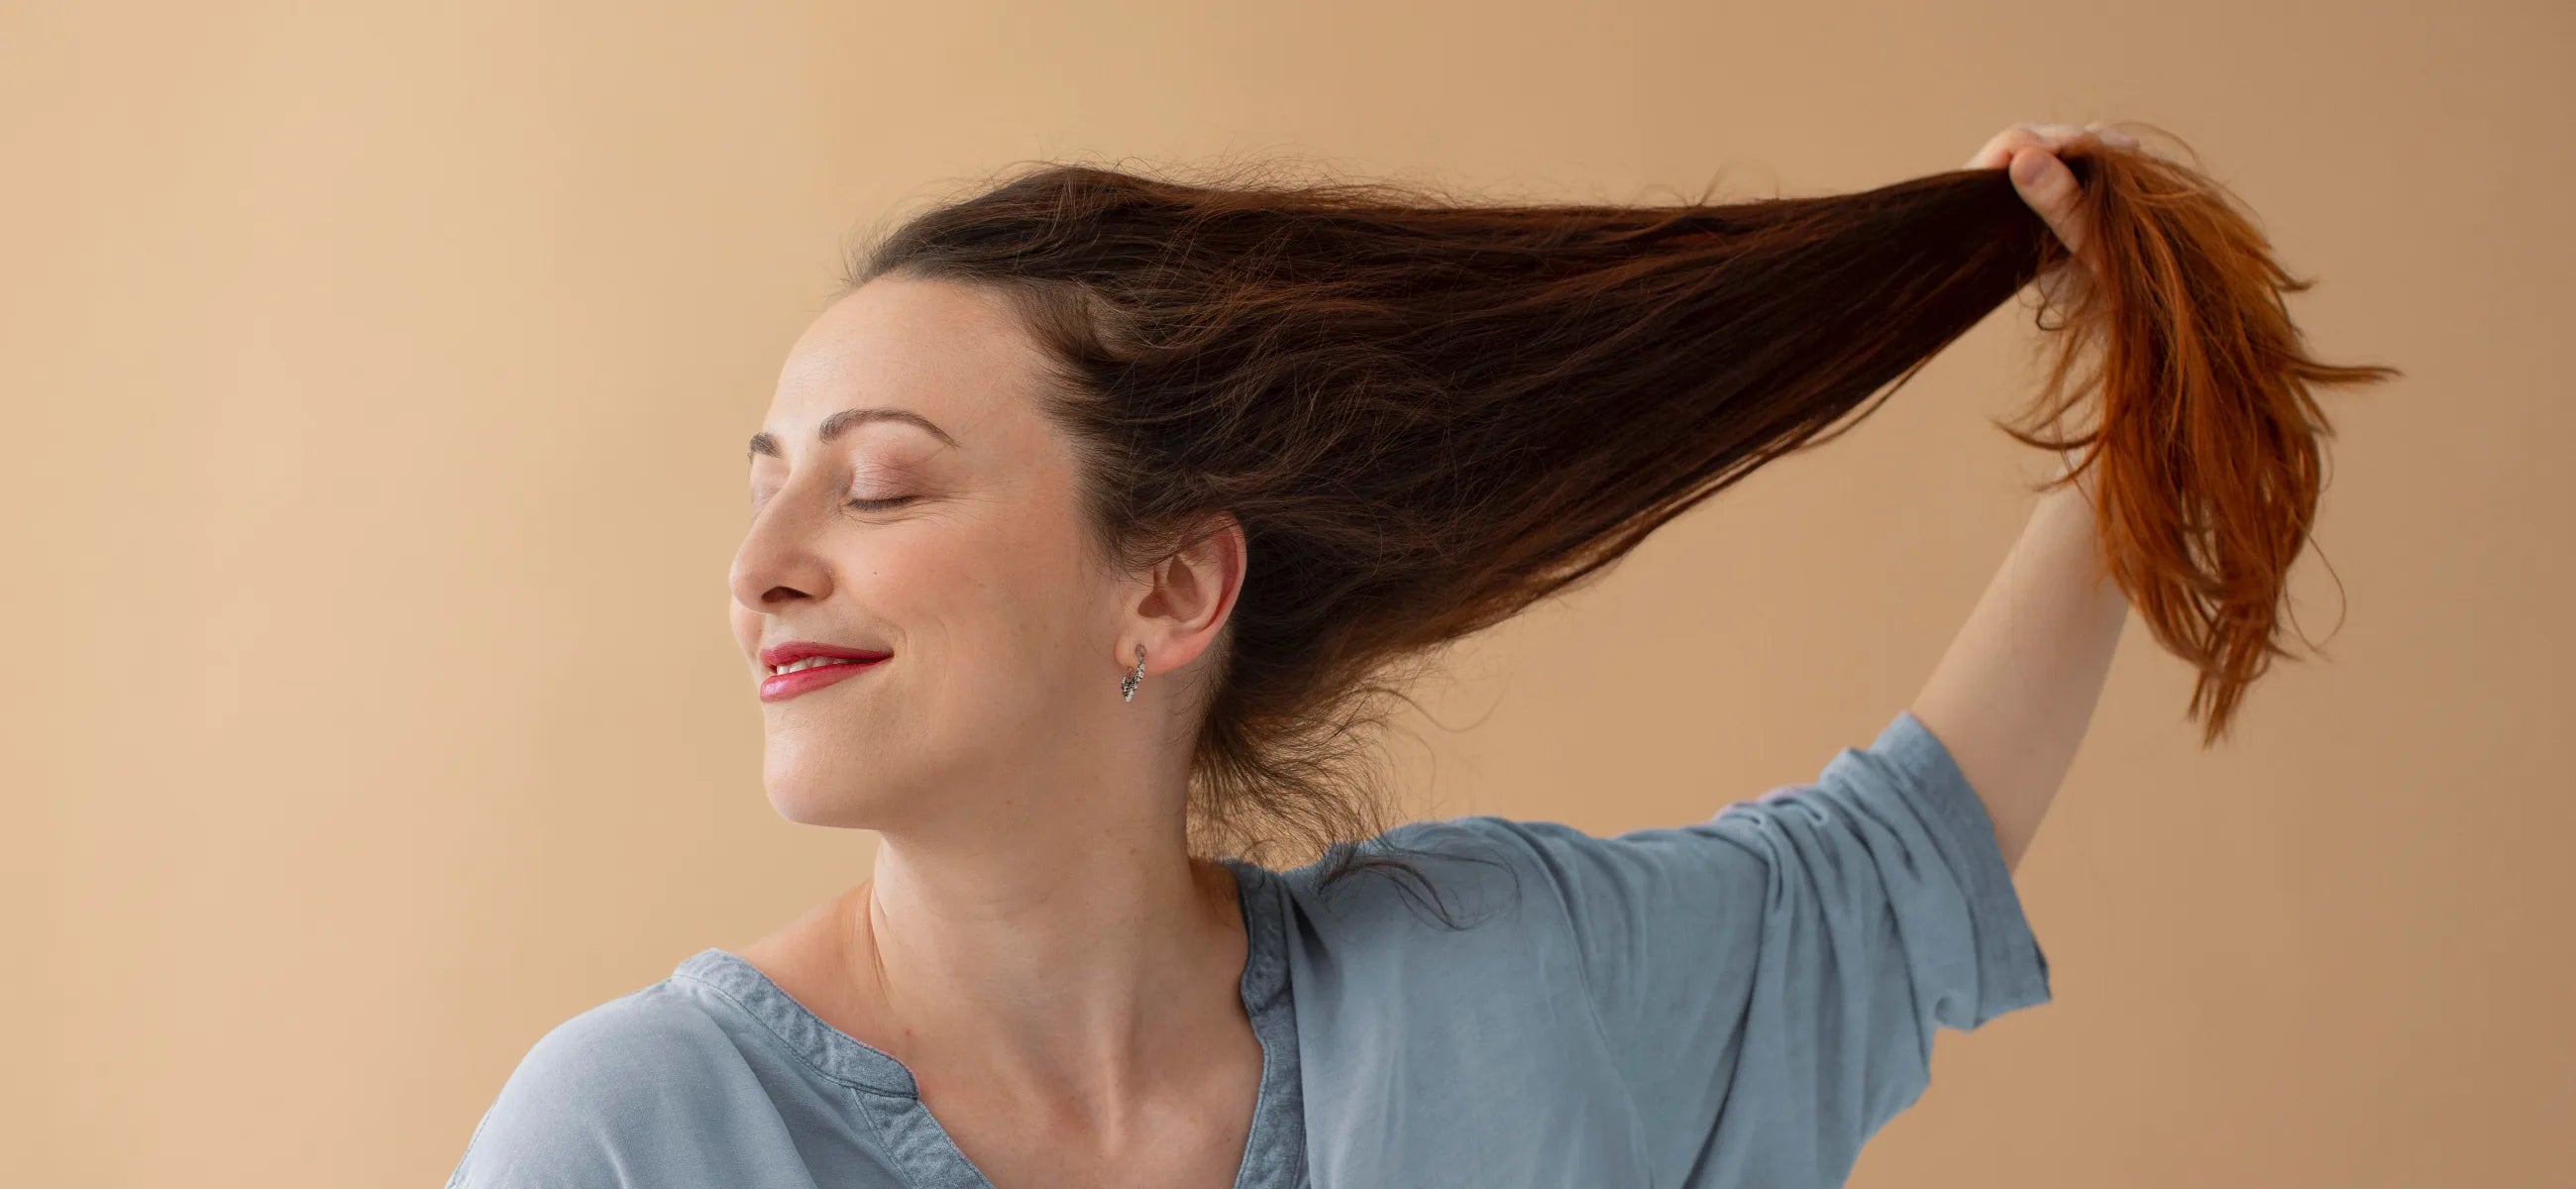 How to dry hair fast without any blow dryers